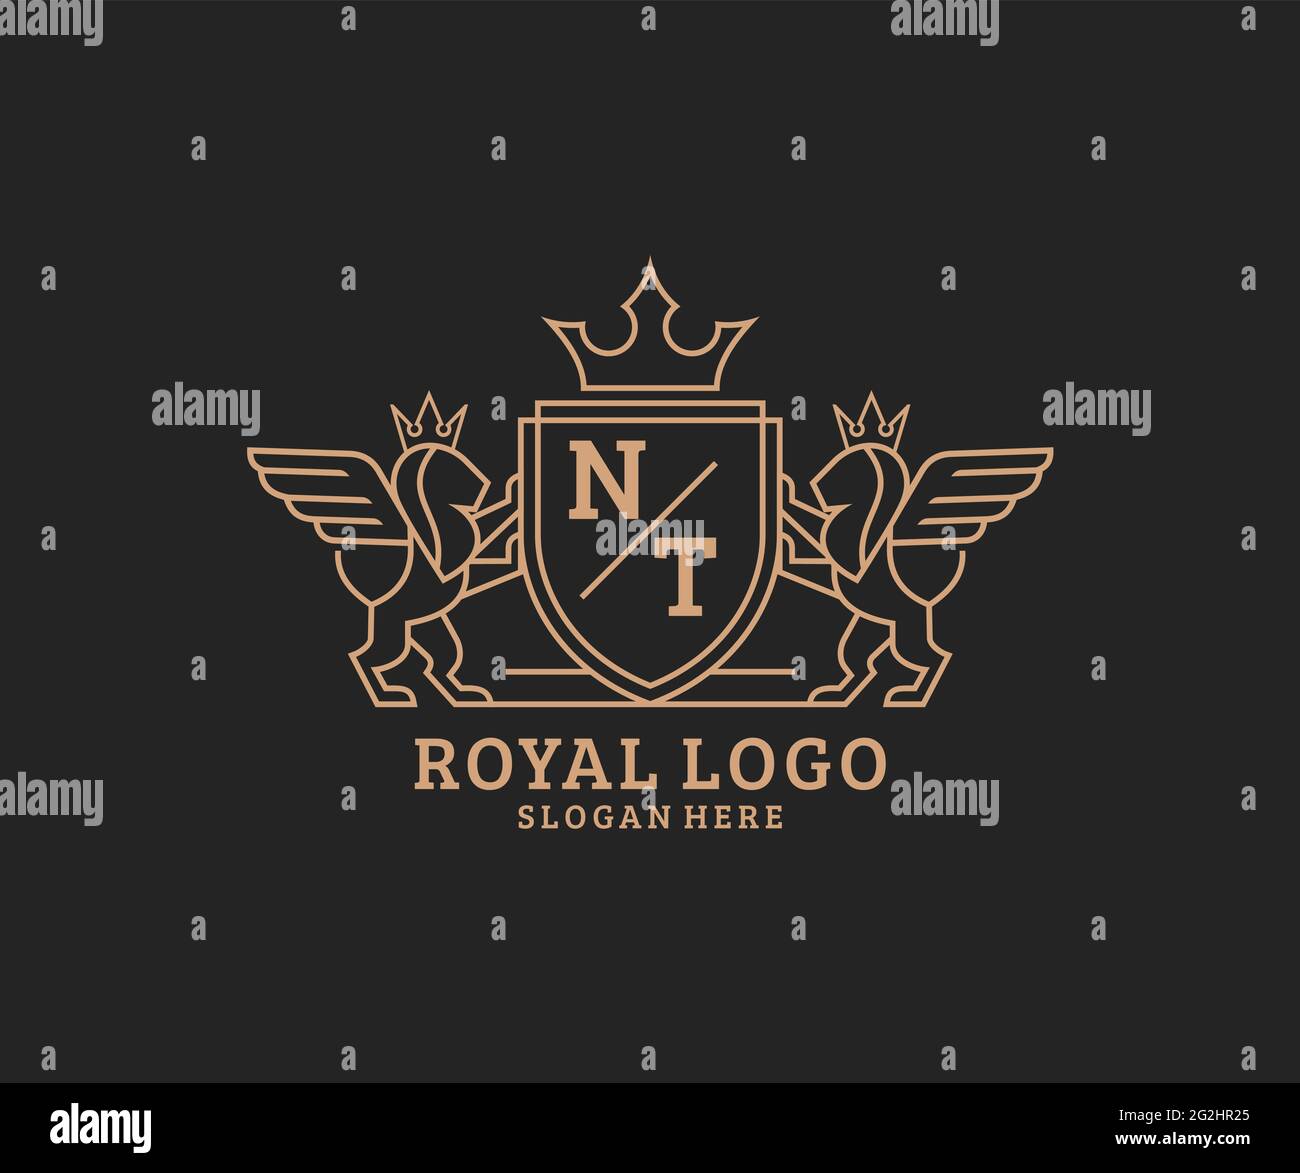 NT Letter Lion Royal Luxury Heraldic,Crest Logo template in vector art for Restaurant, Royalty, Boutique, Cafe, Hotel, Heraldic, Jewelry, Fashion and Stock Vector